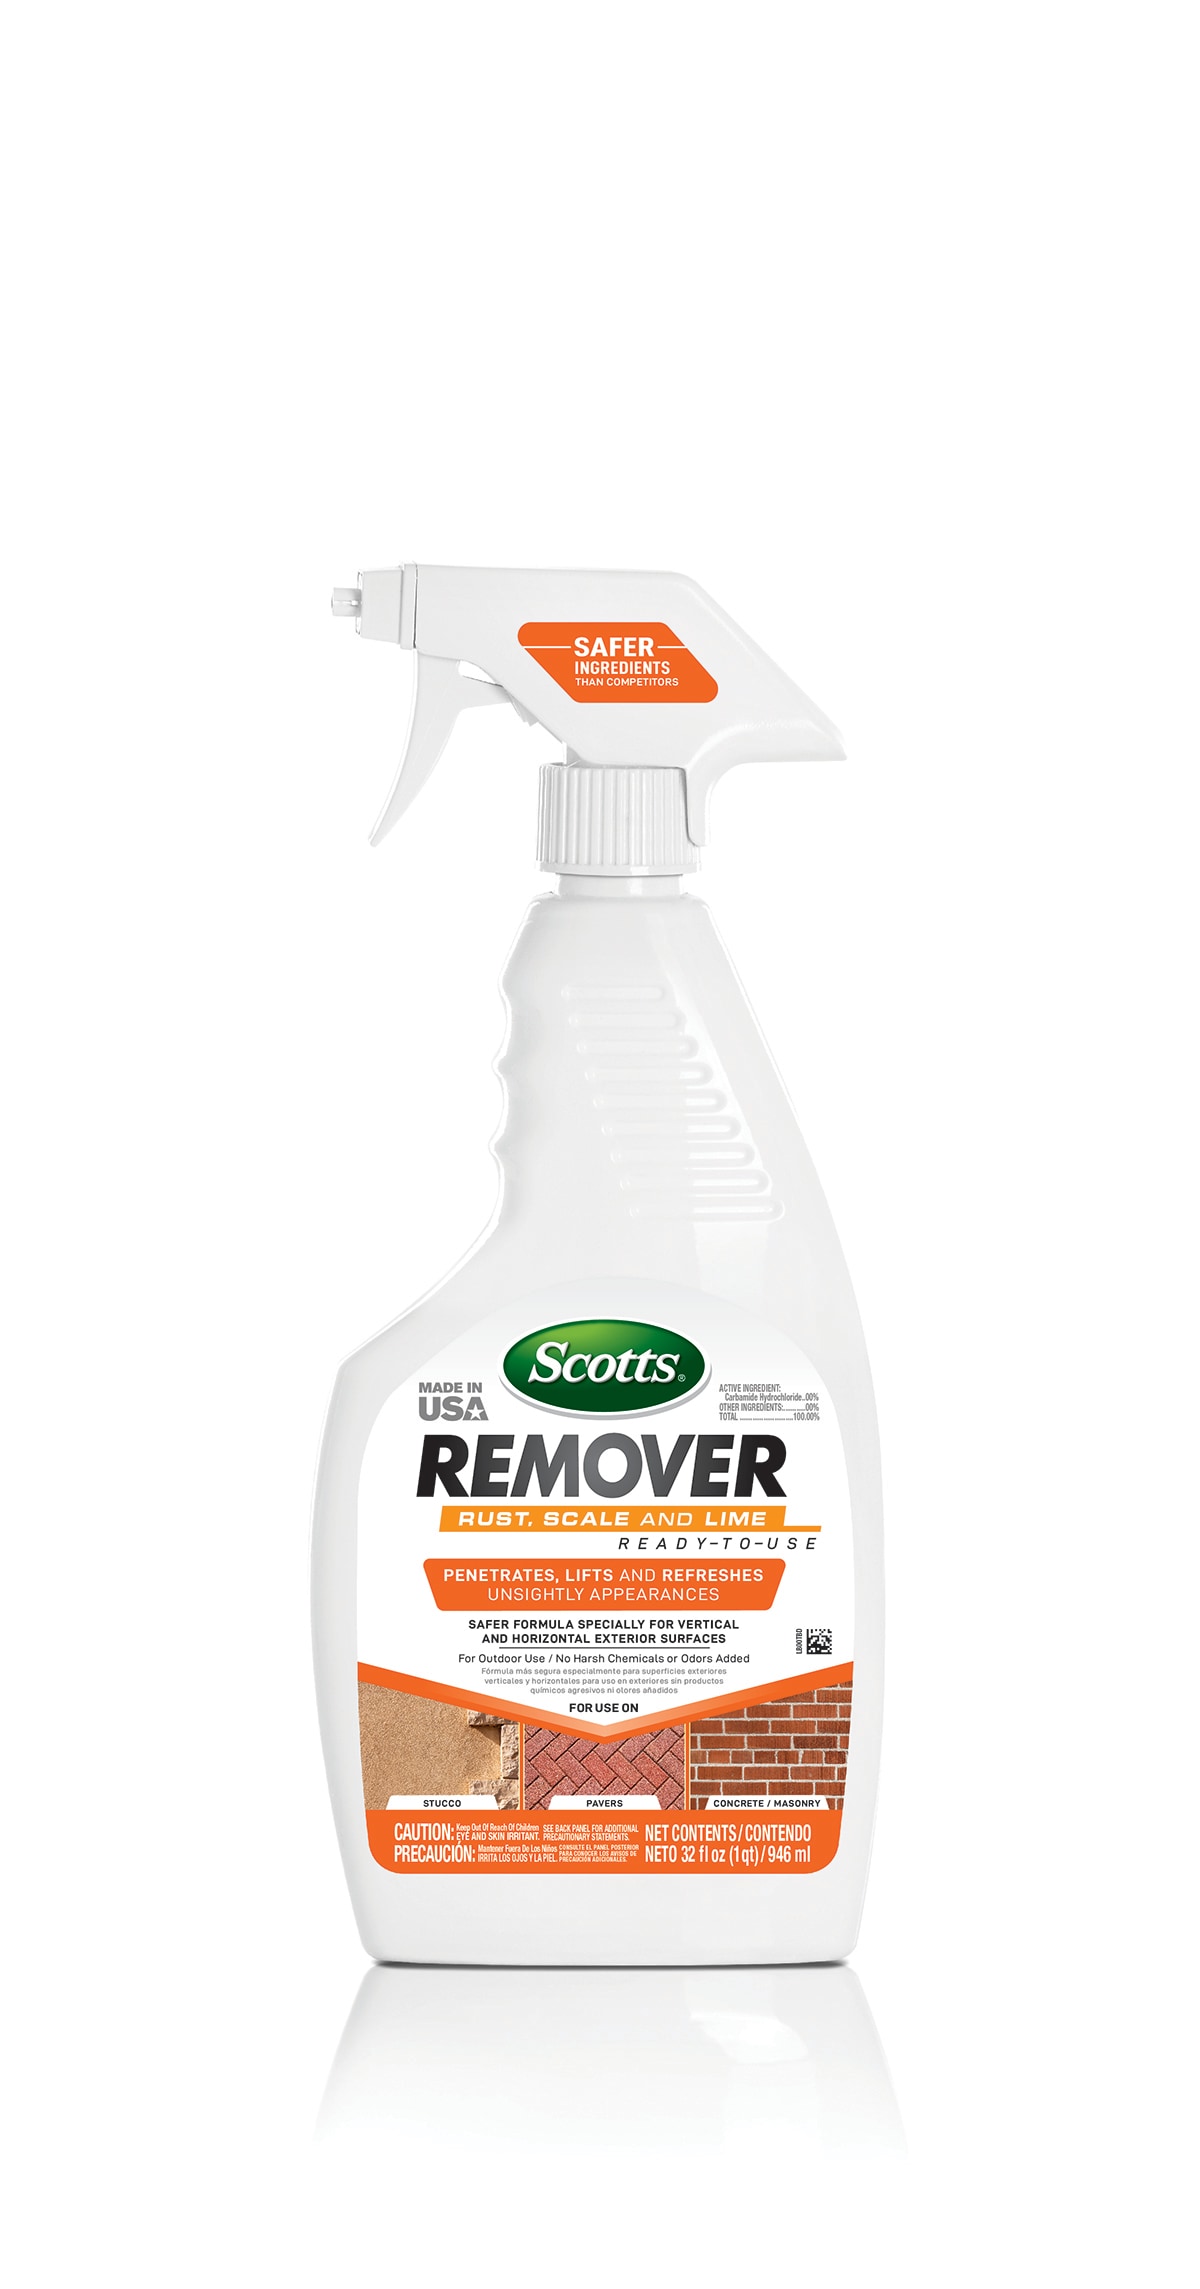 Goof Off Latex and Paint Adhesive Remover, 16 oz. - Fast & Efficient -  Removes Dried Paint & Tough Adhesives - Safe for Multiple Surfaces